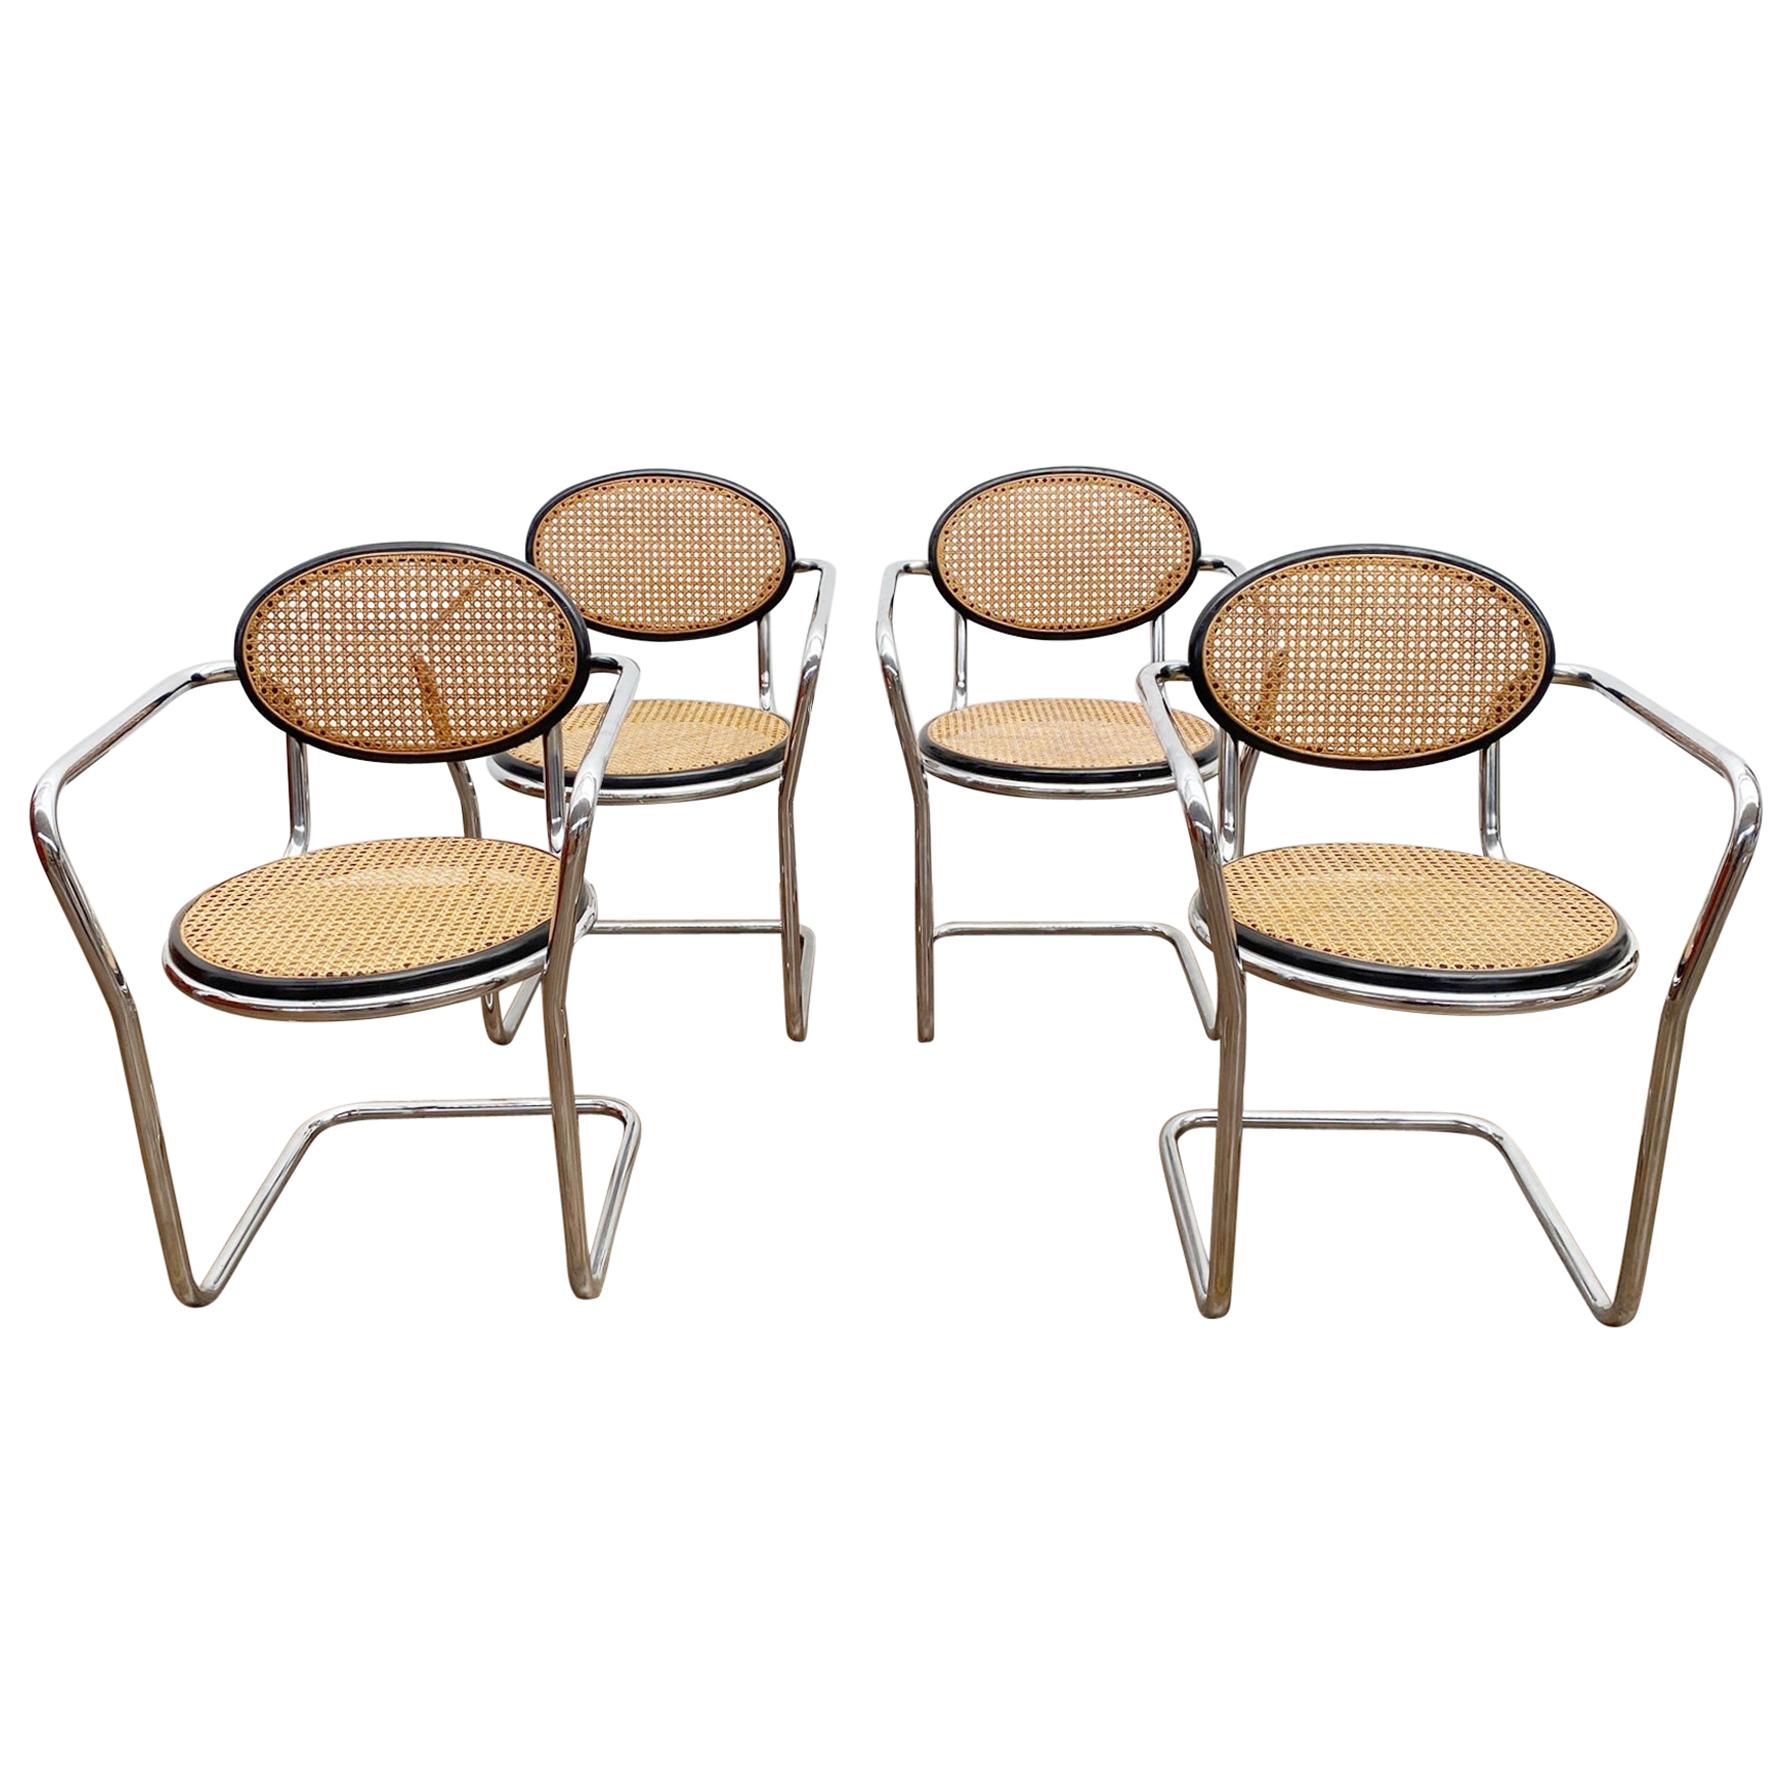 Set of 4 Mid-Century Italian Tubular and Caning Chairs, 1970s